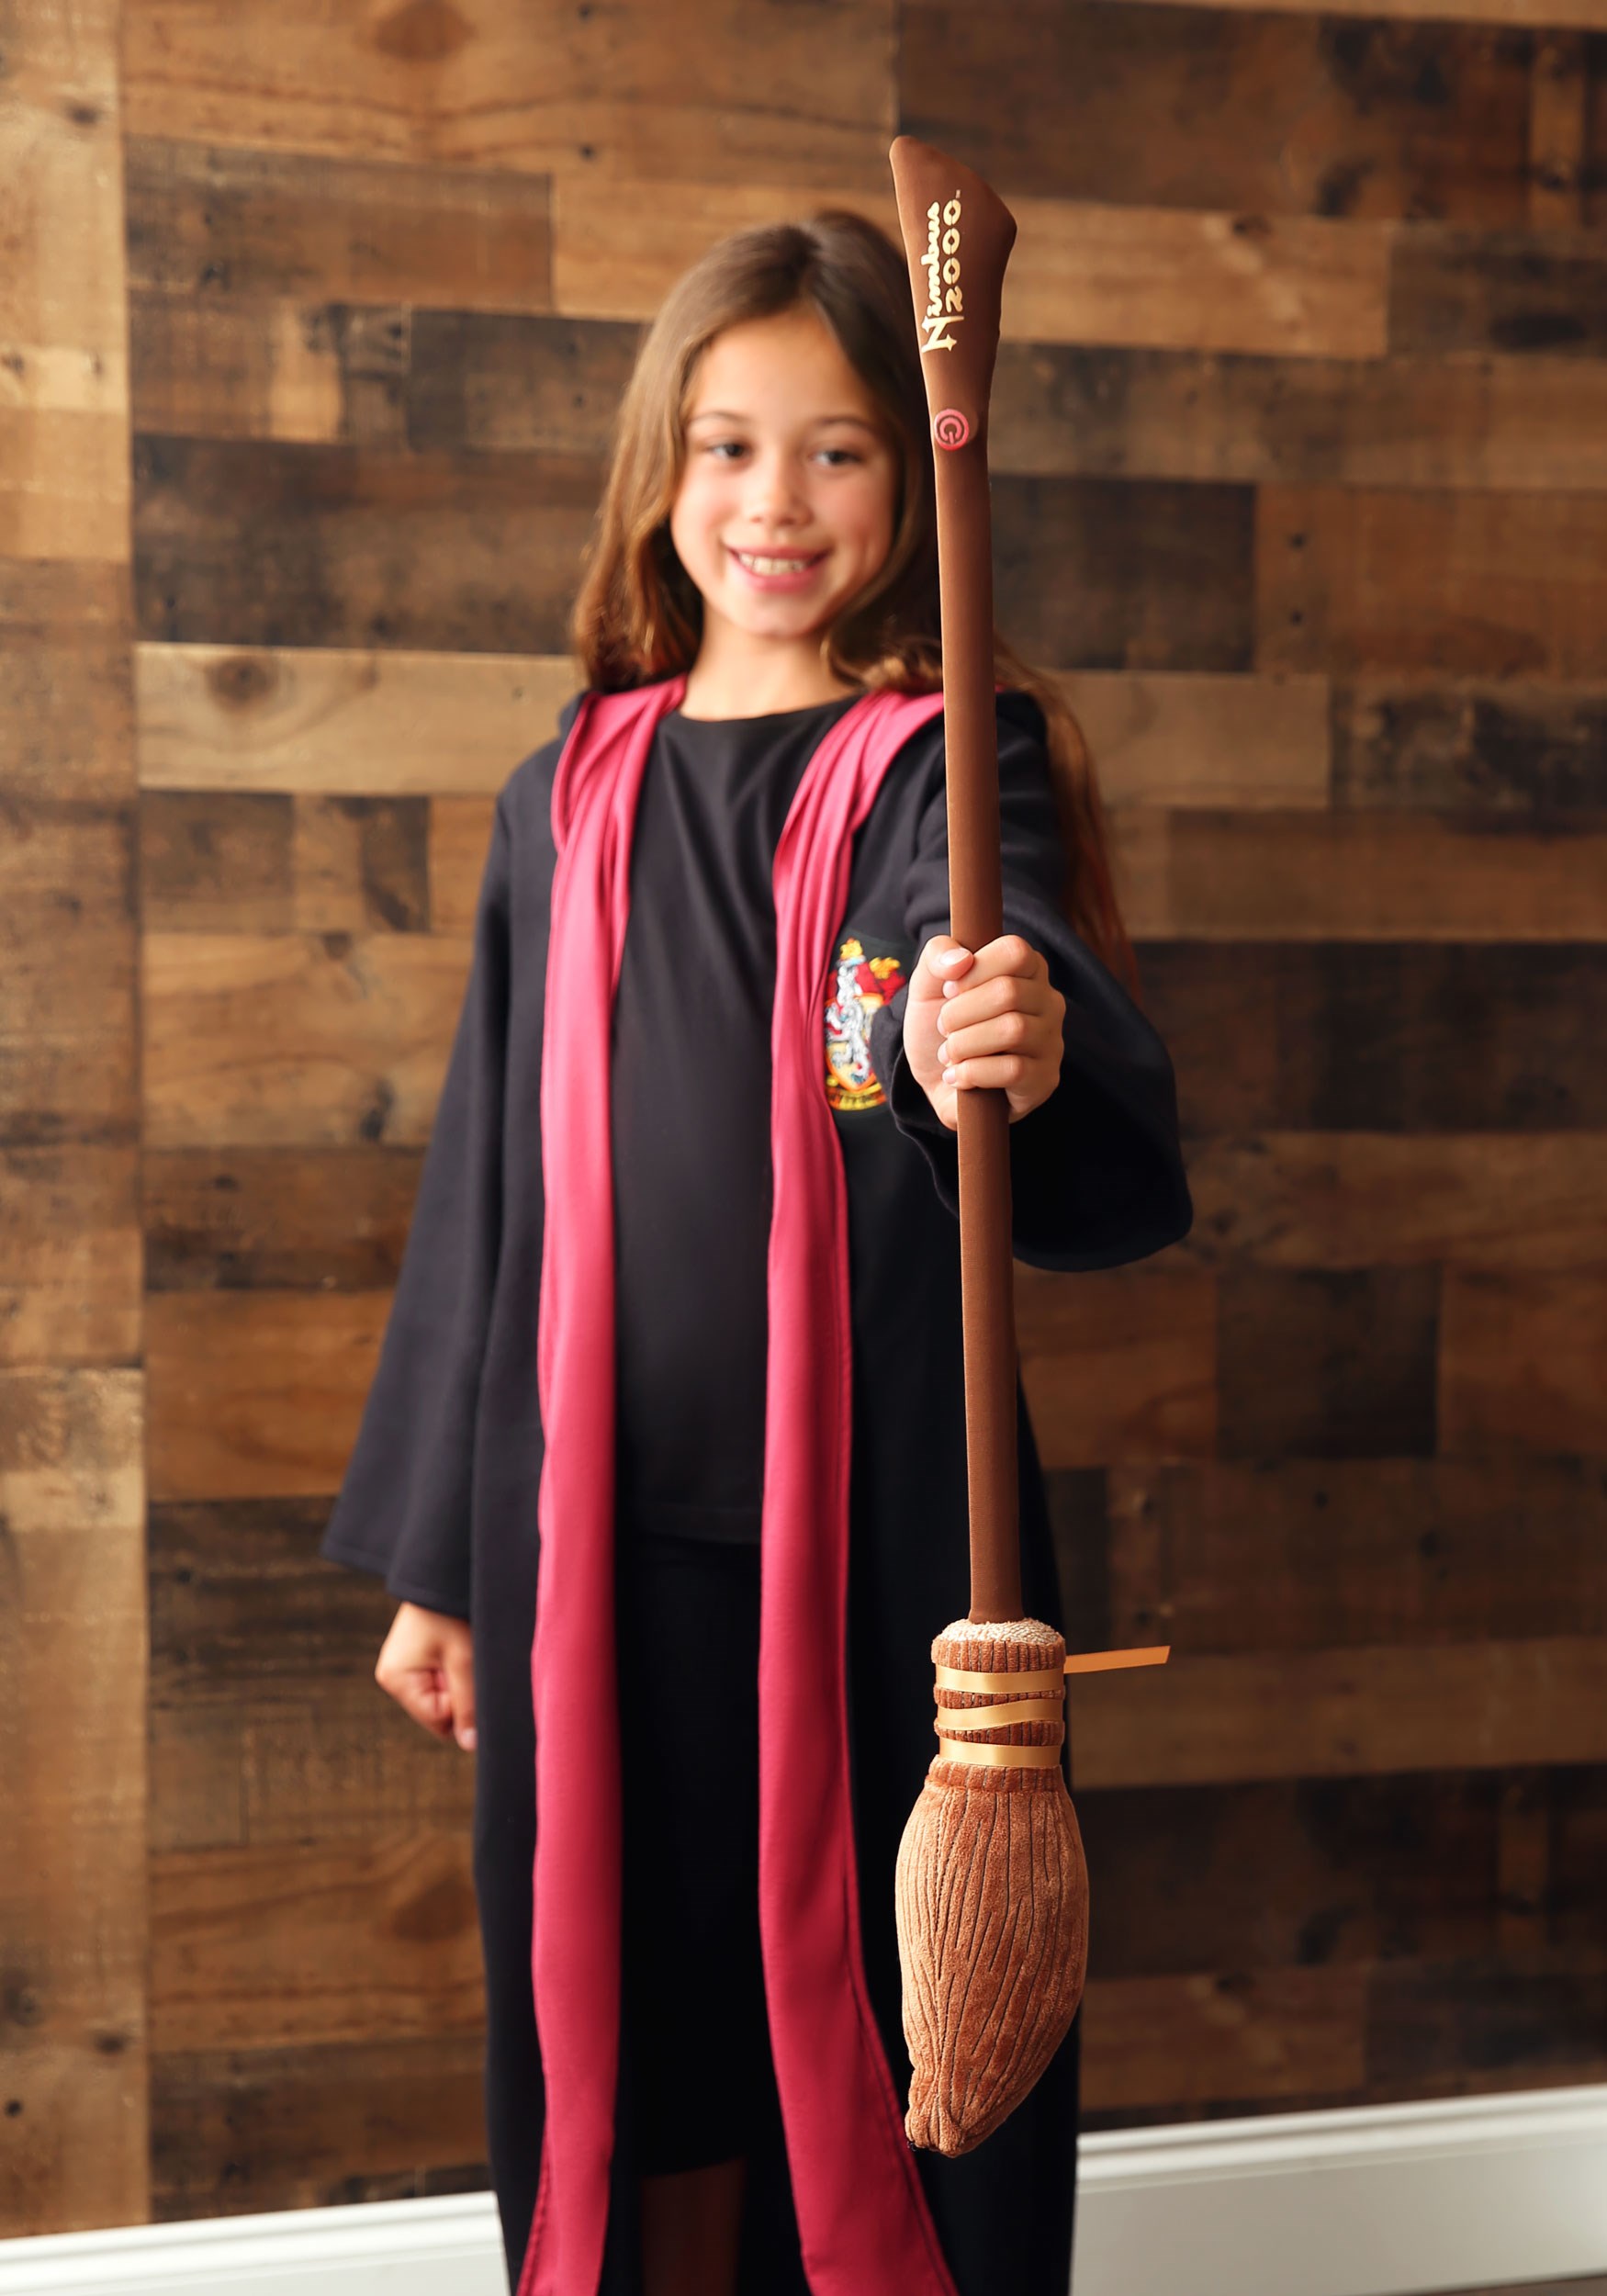 How to Make a Nimbus 2000  Harry potter broomstick, Harry potter crafts,  Harry potter diy